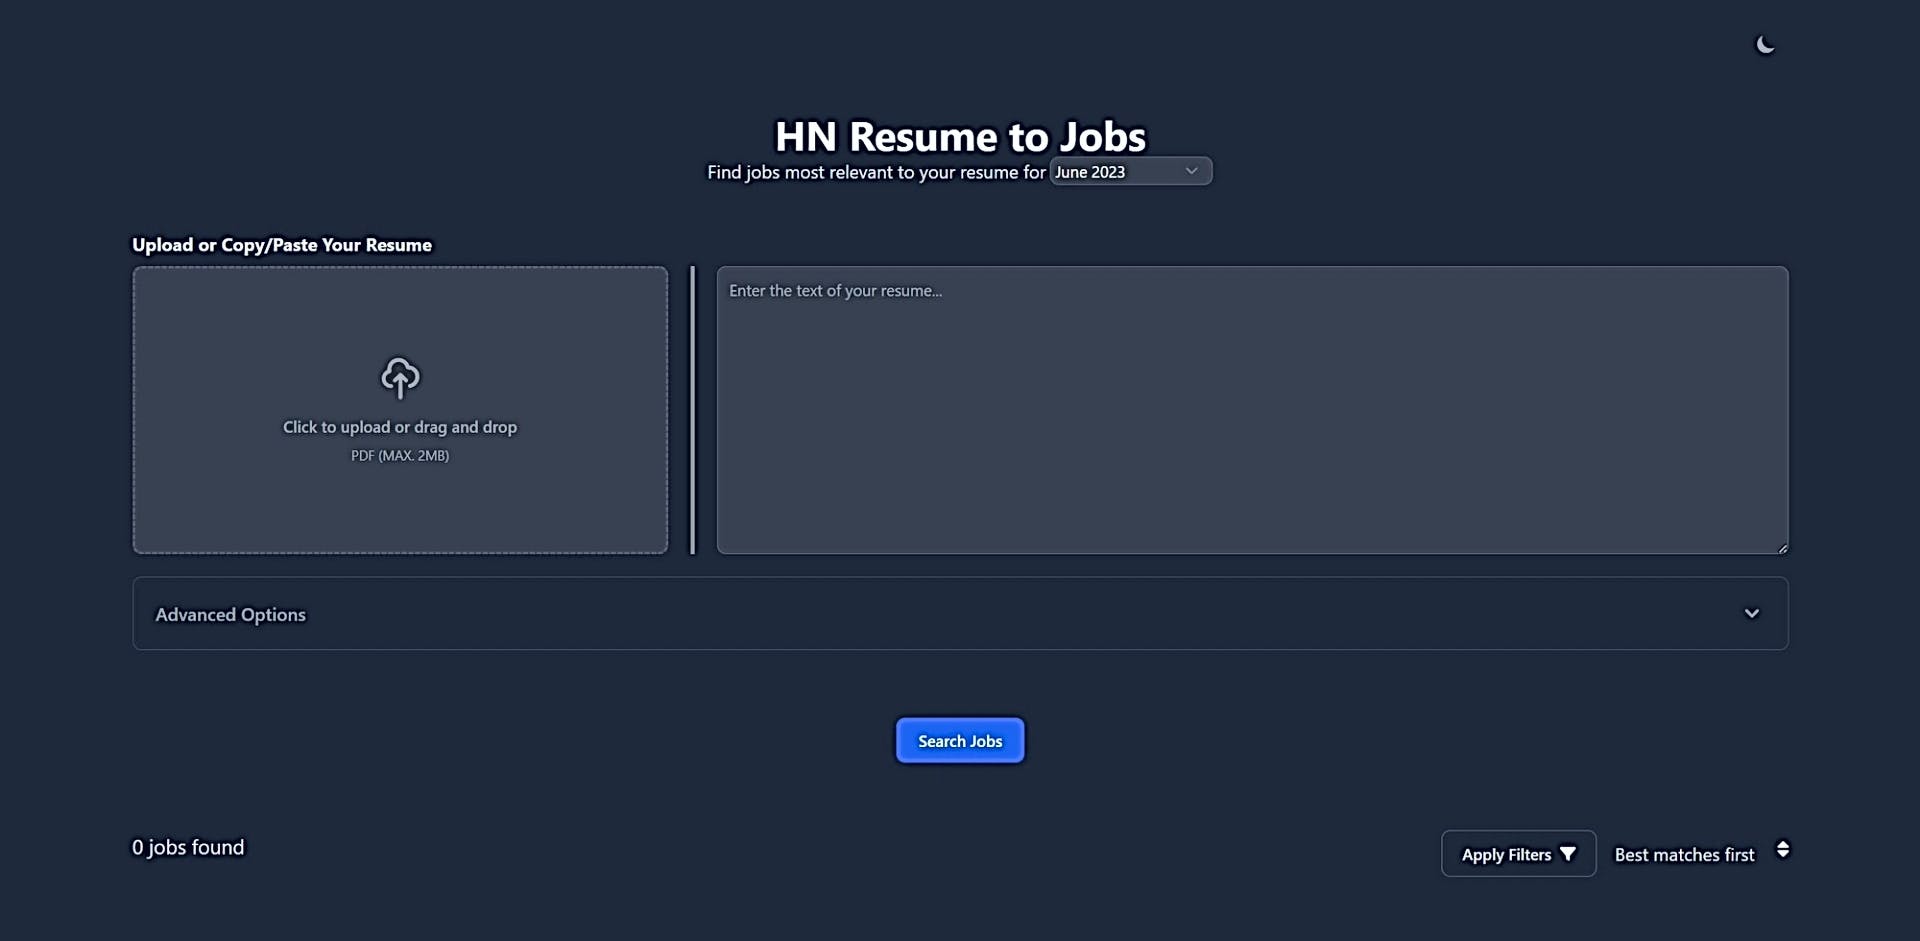 HN Resume to Jobs featured